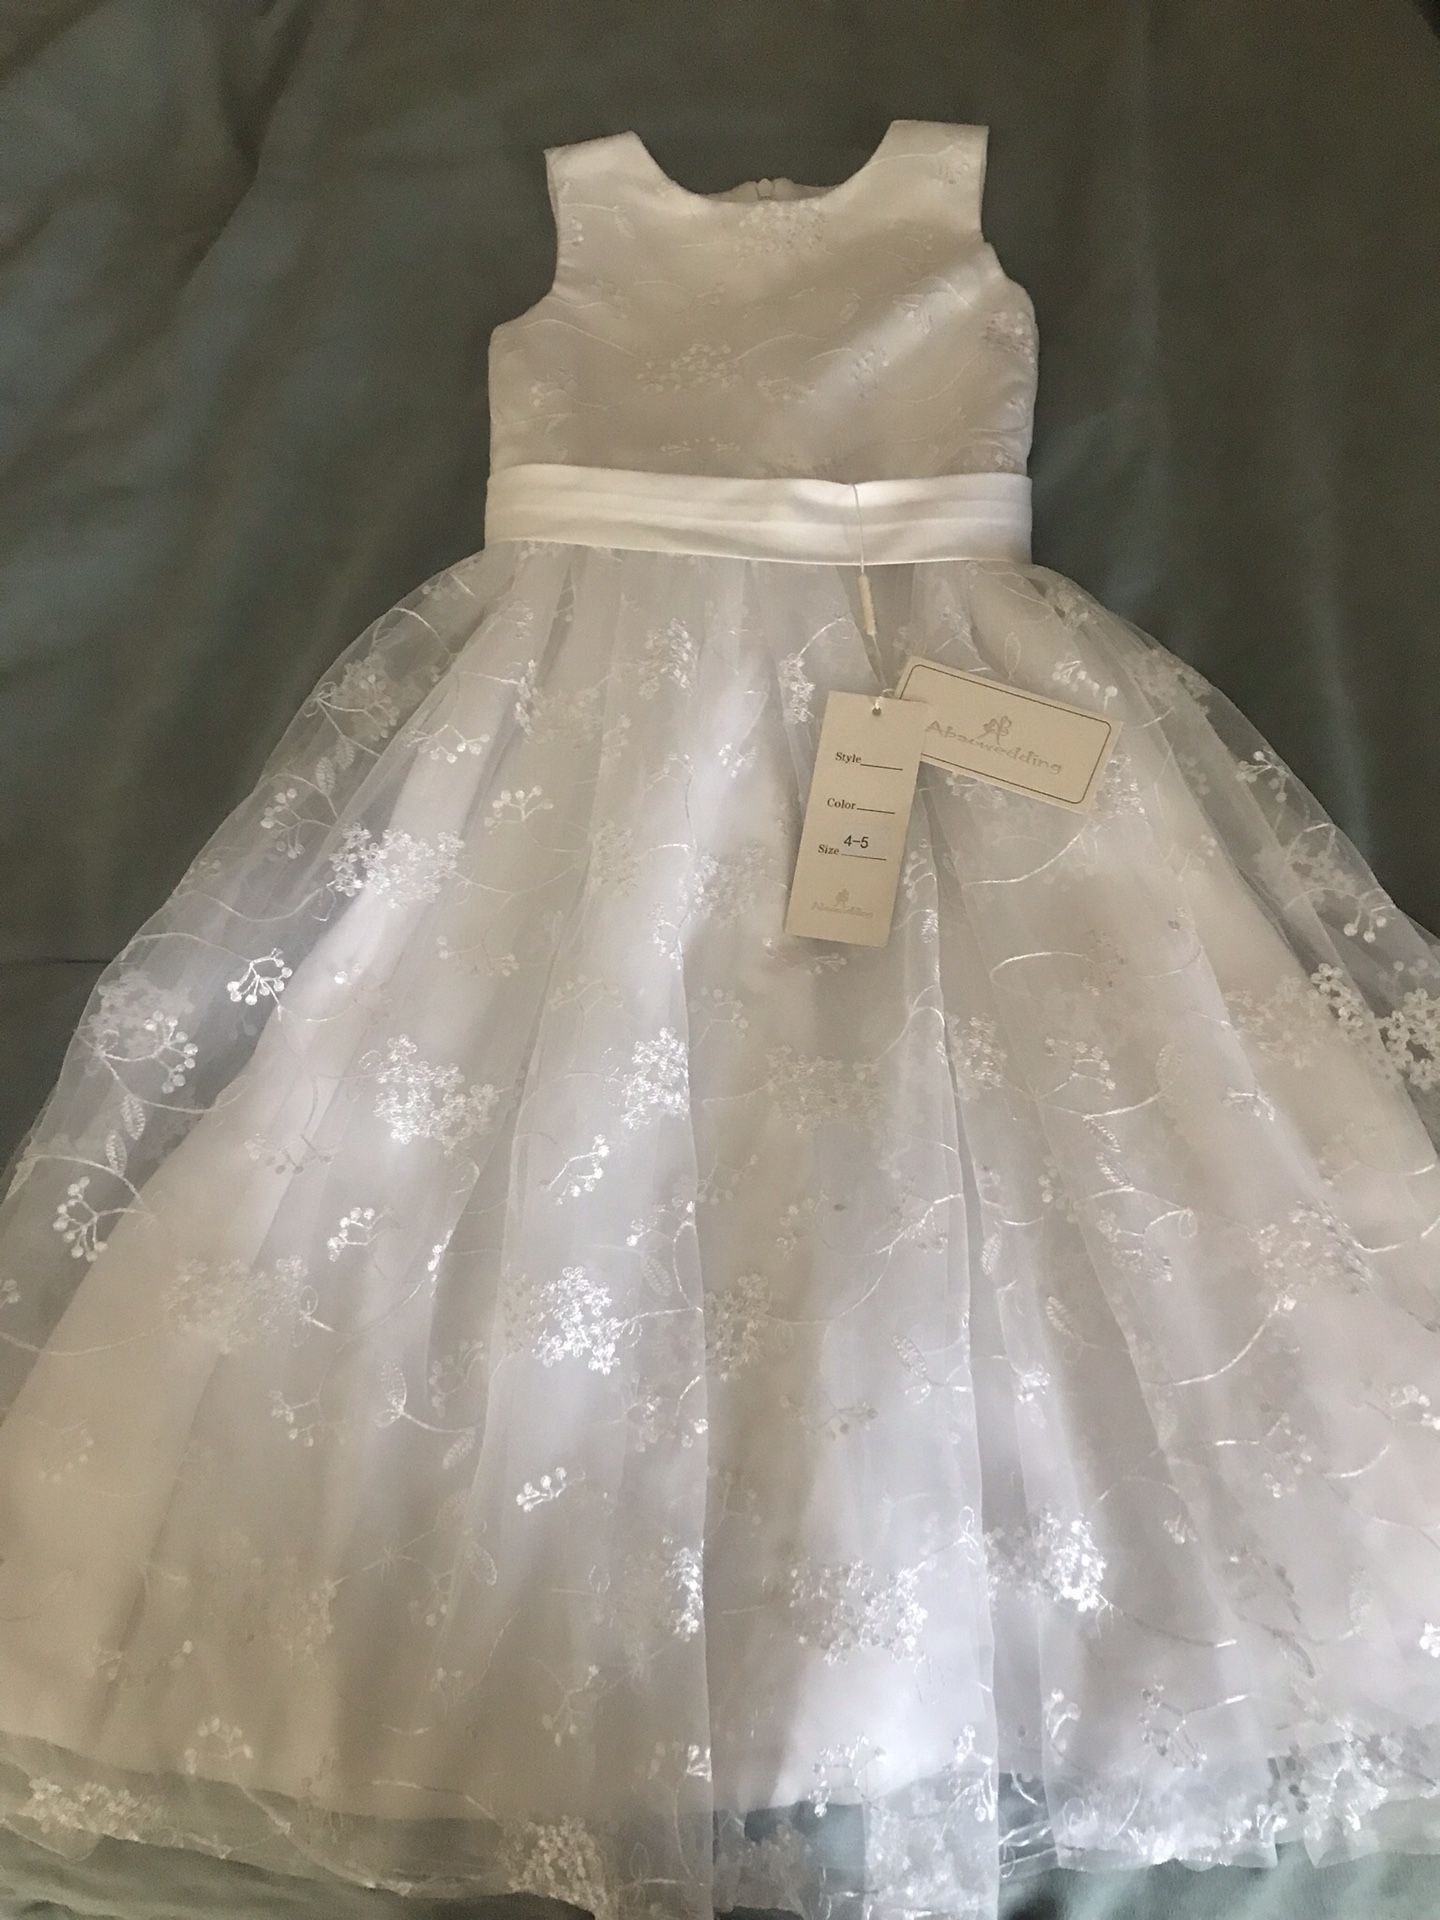 New With Tags Abao Girls Flower Girl Dress Size 4